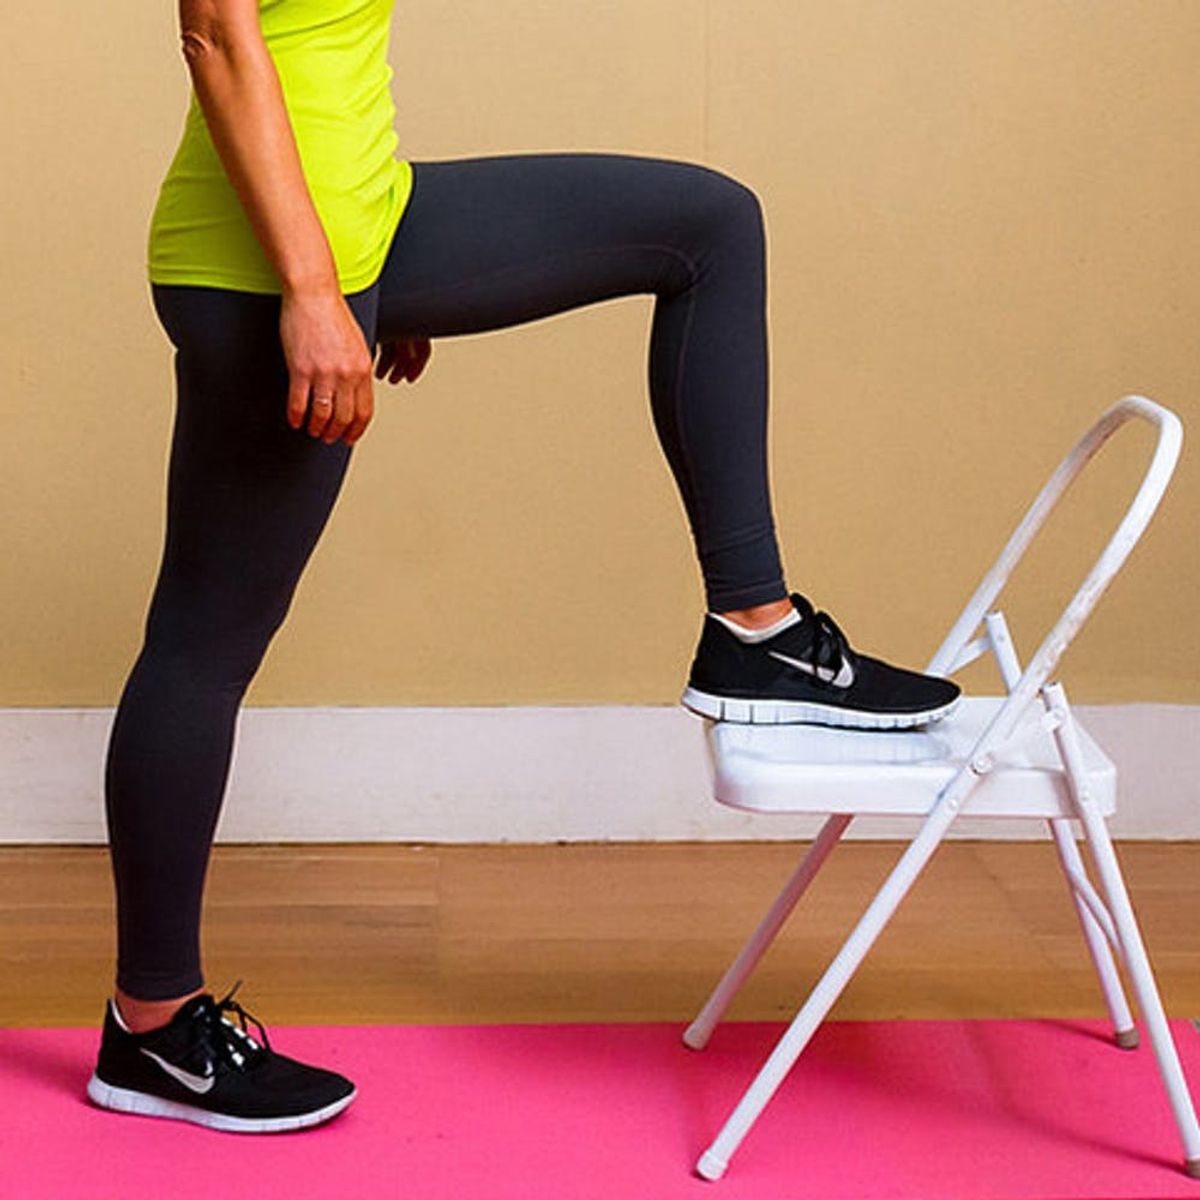 No Gym Membership? No Prob! 11 Exercises That Only Require a Chair